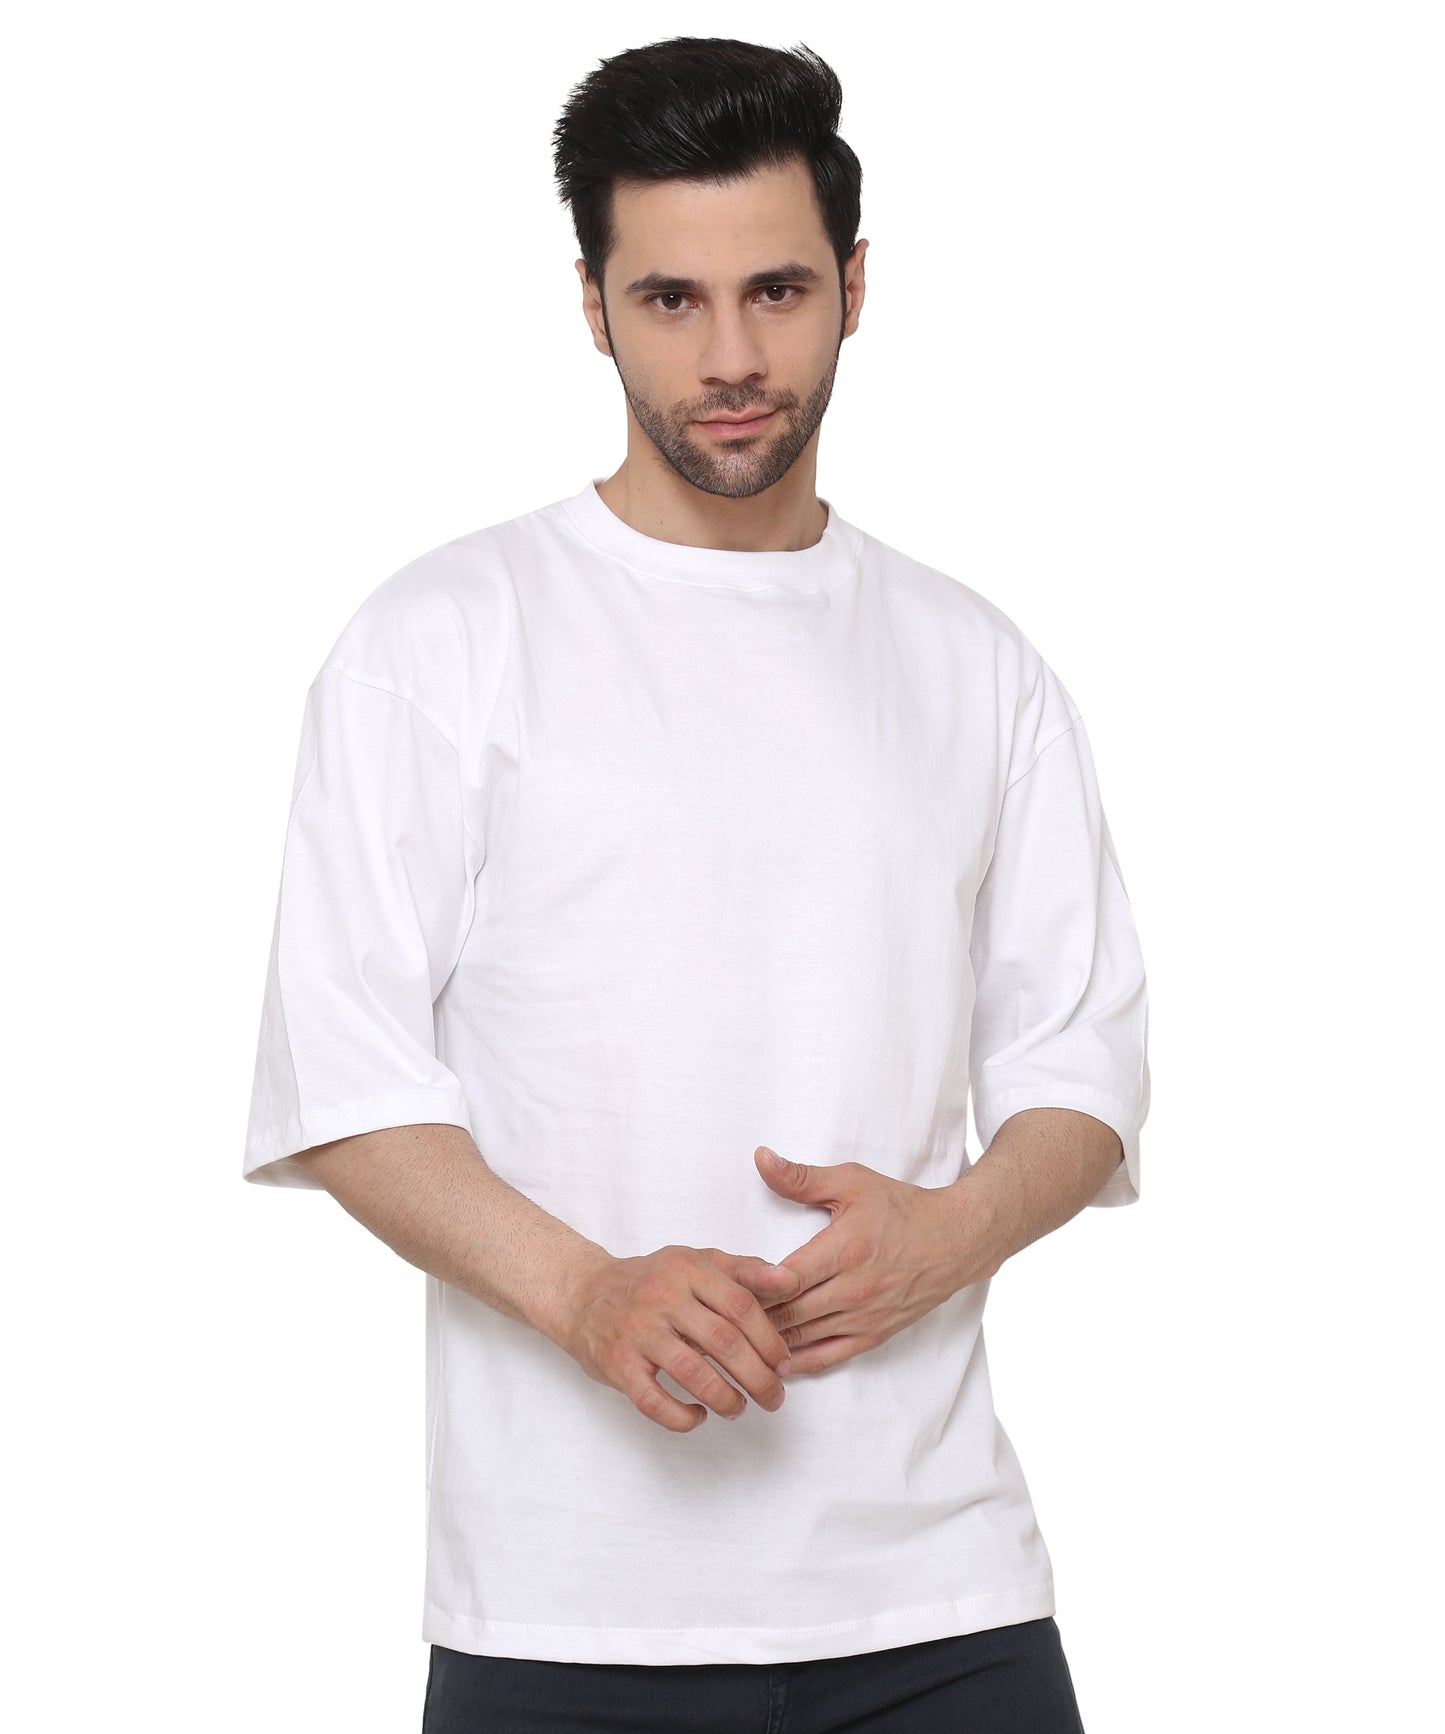 White Oversized Cotton T-shirts Relaxed Fit Tees for Men